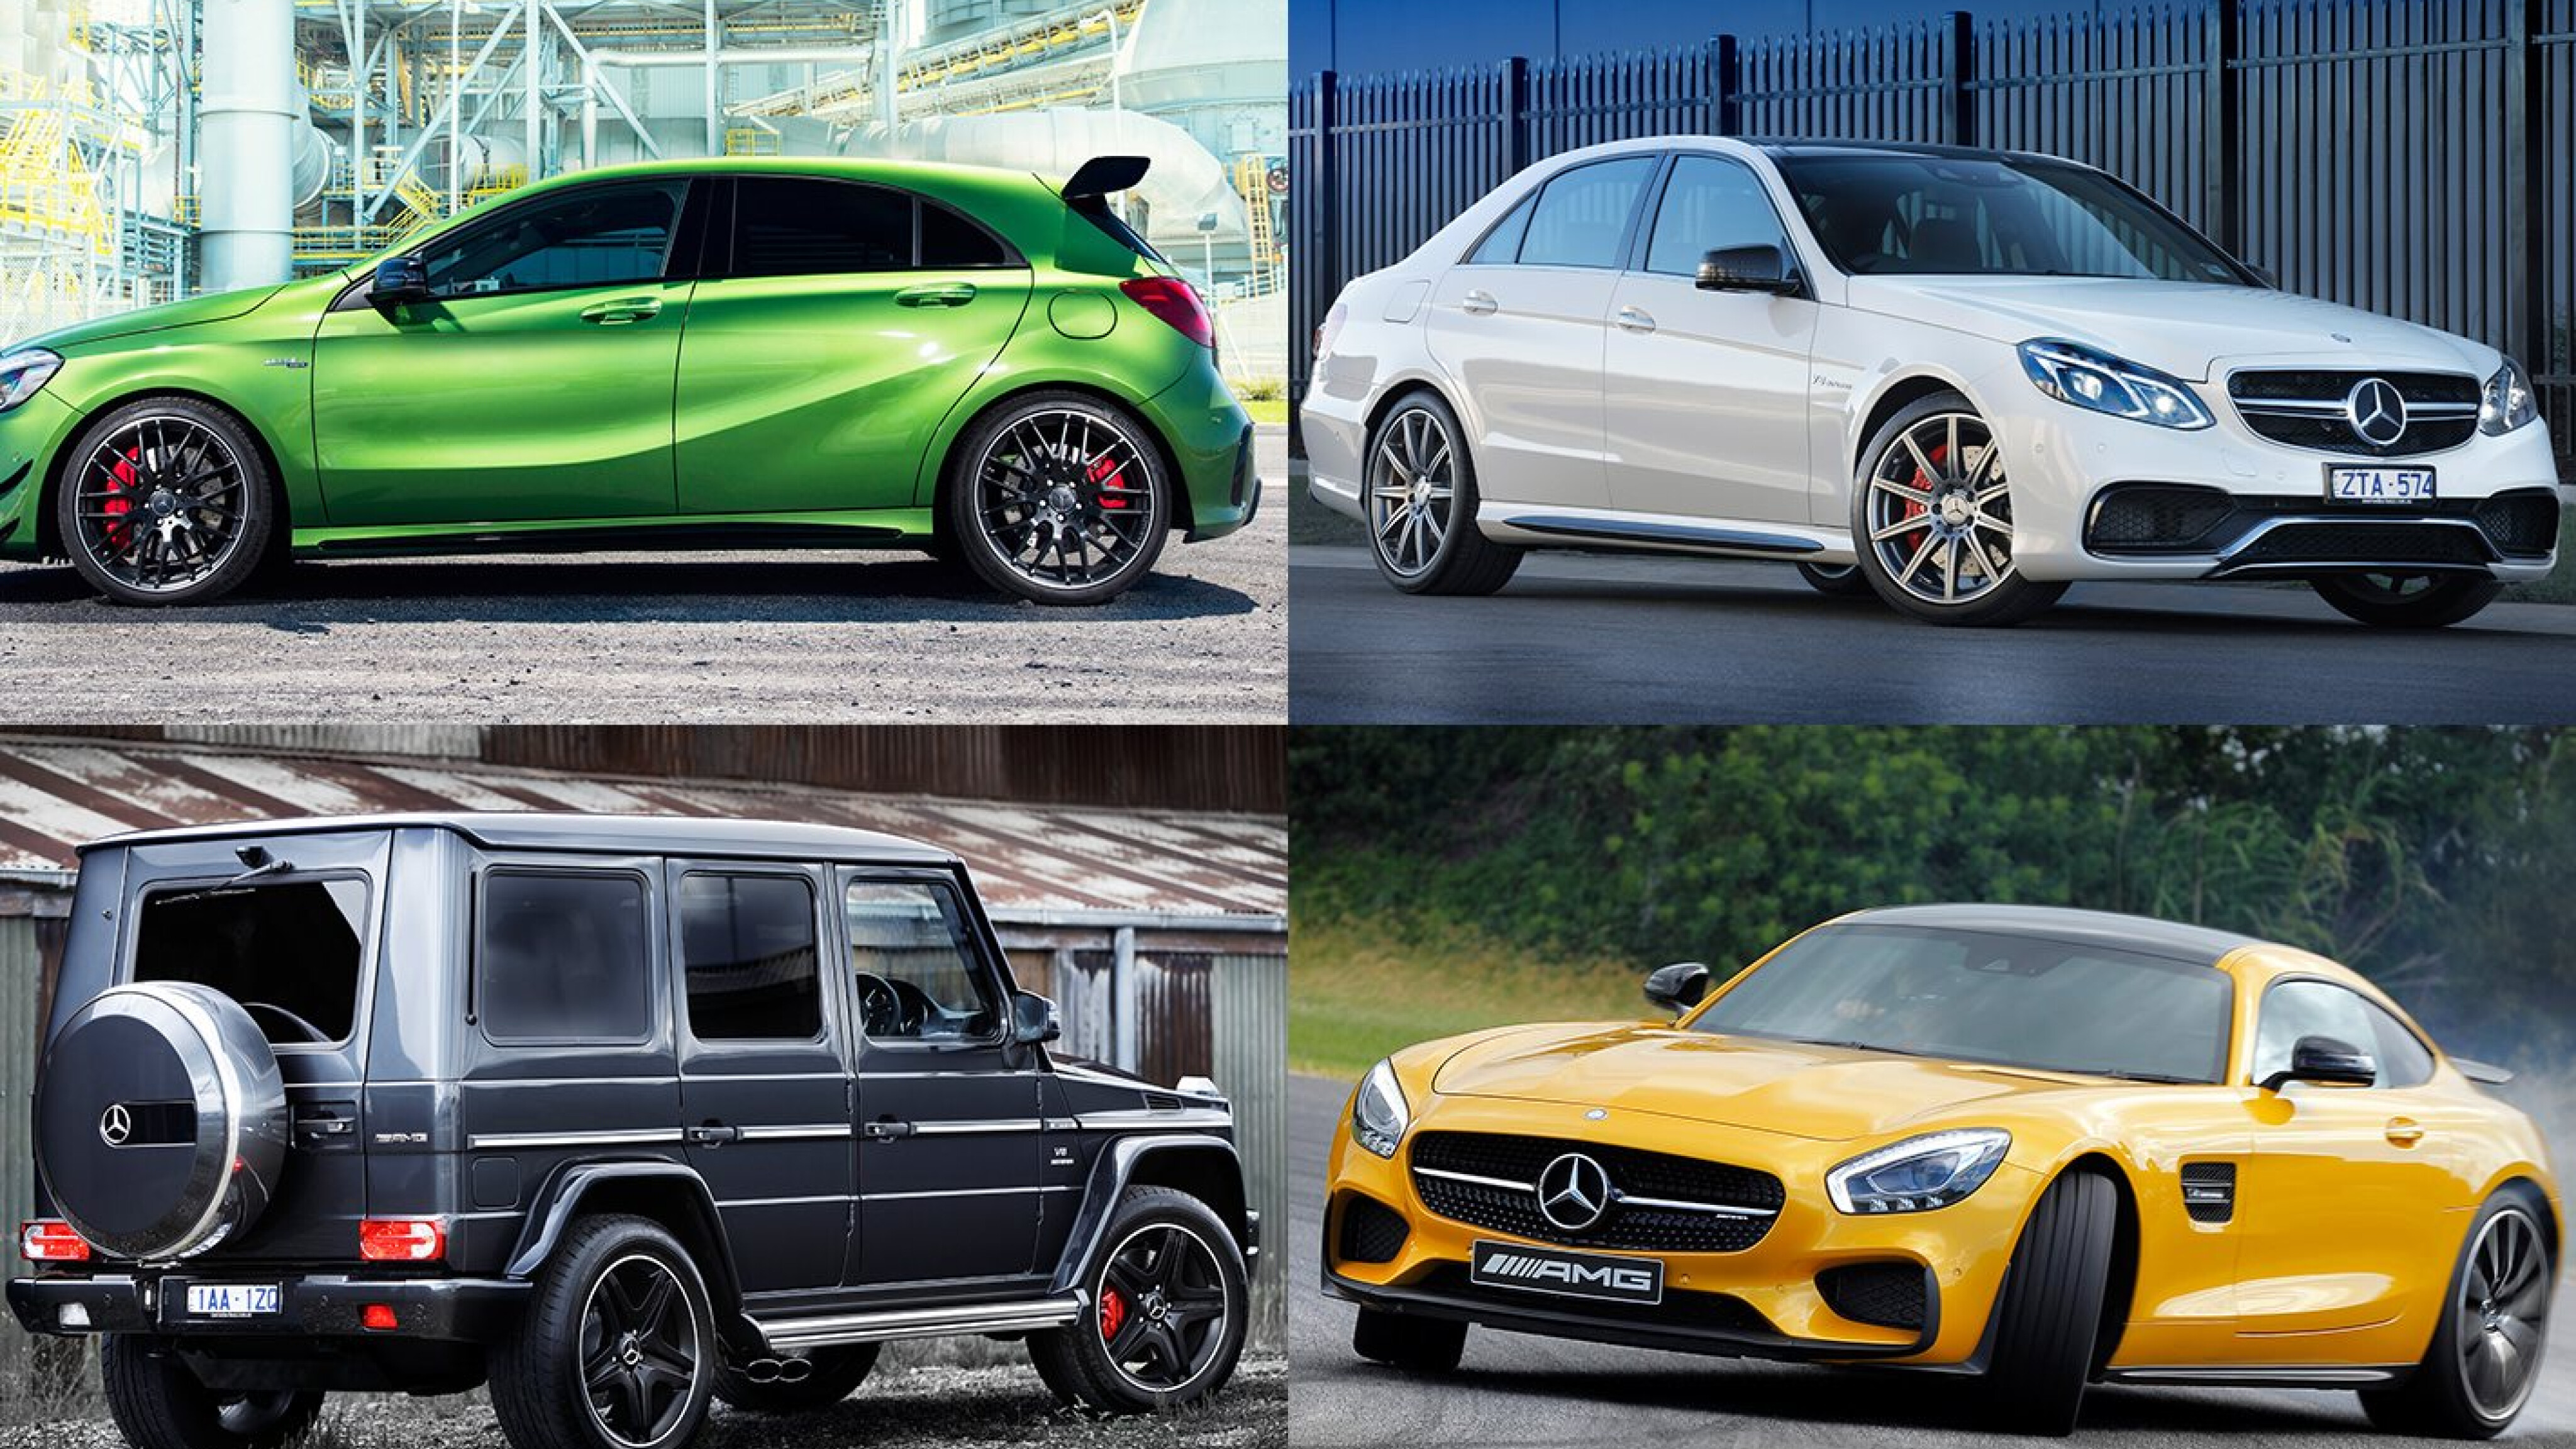 This is the full Mercedes-AMG range